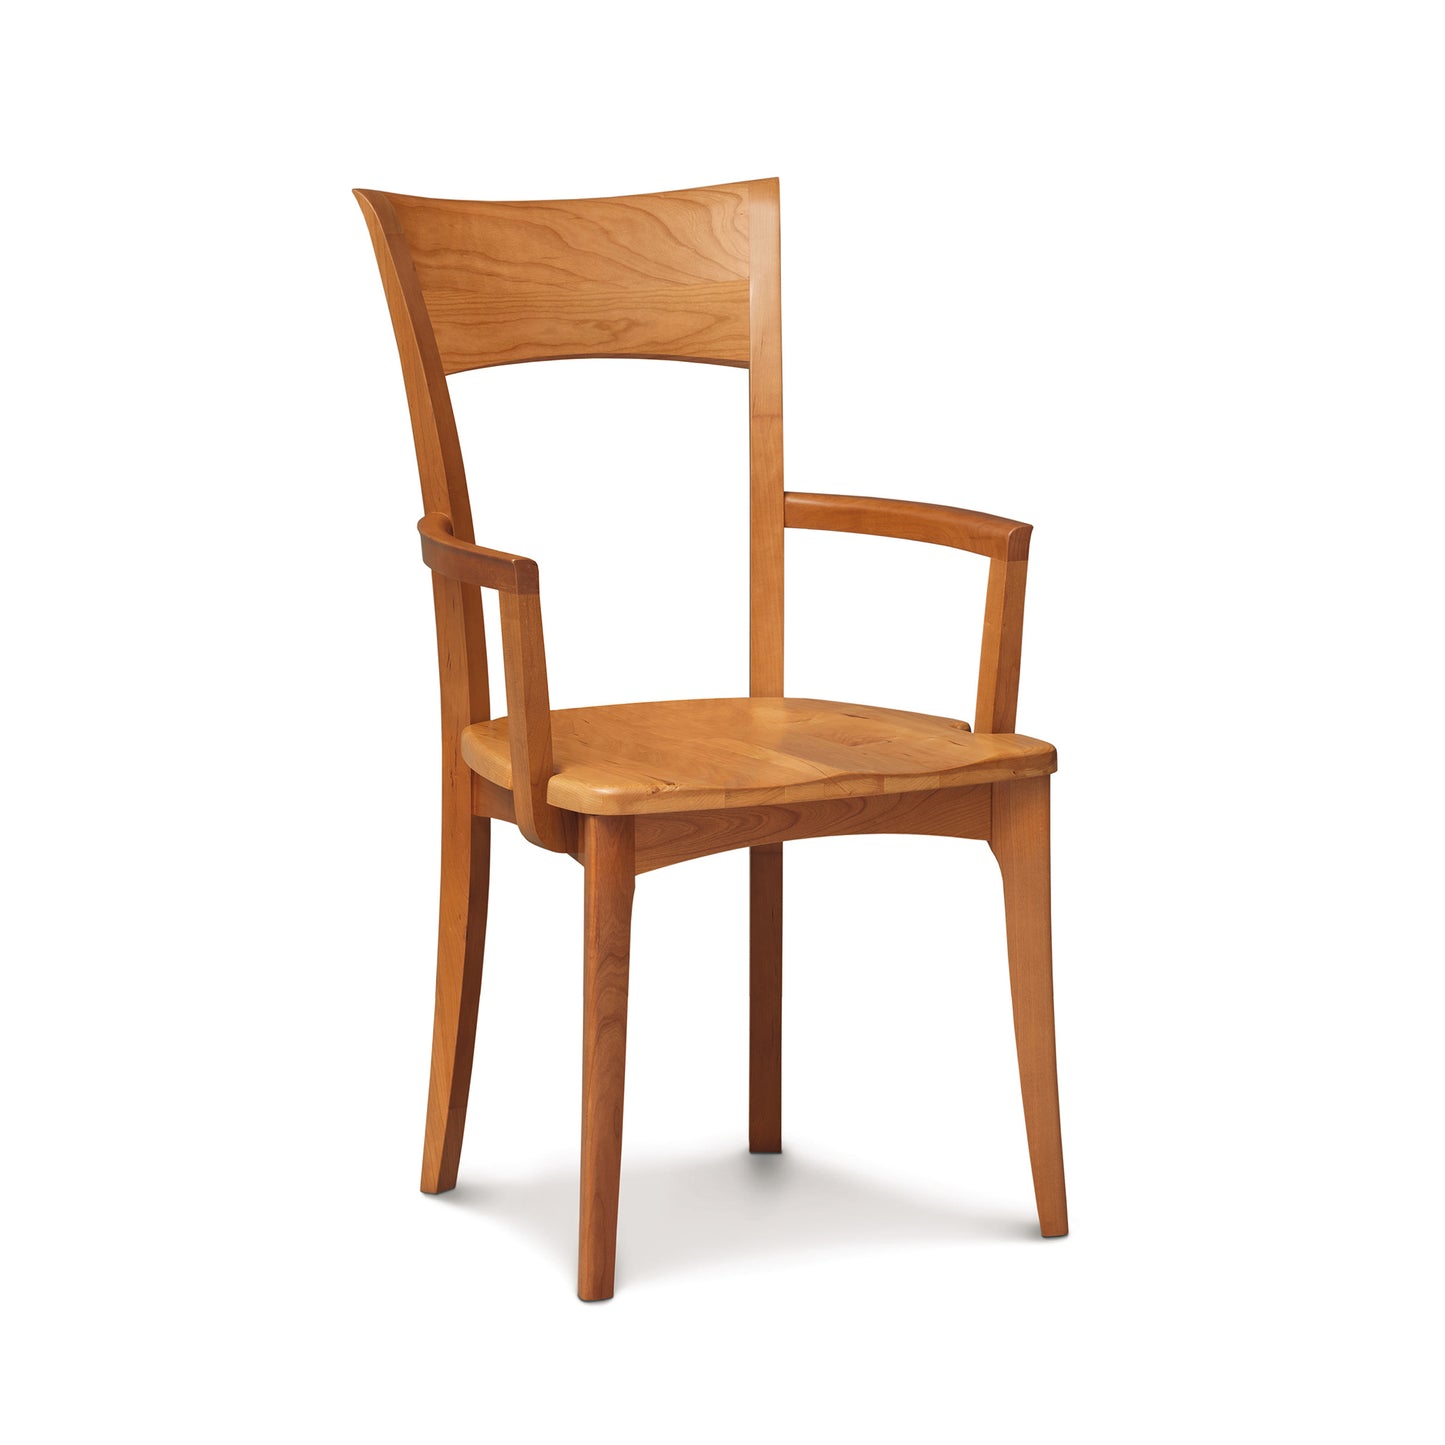 A wooden chair with arms on a white background.